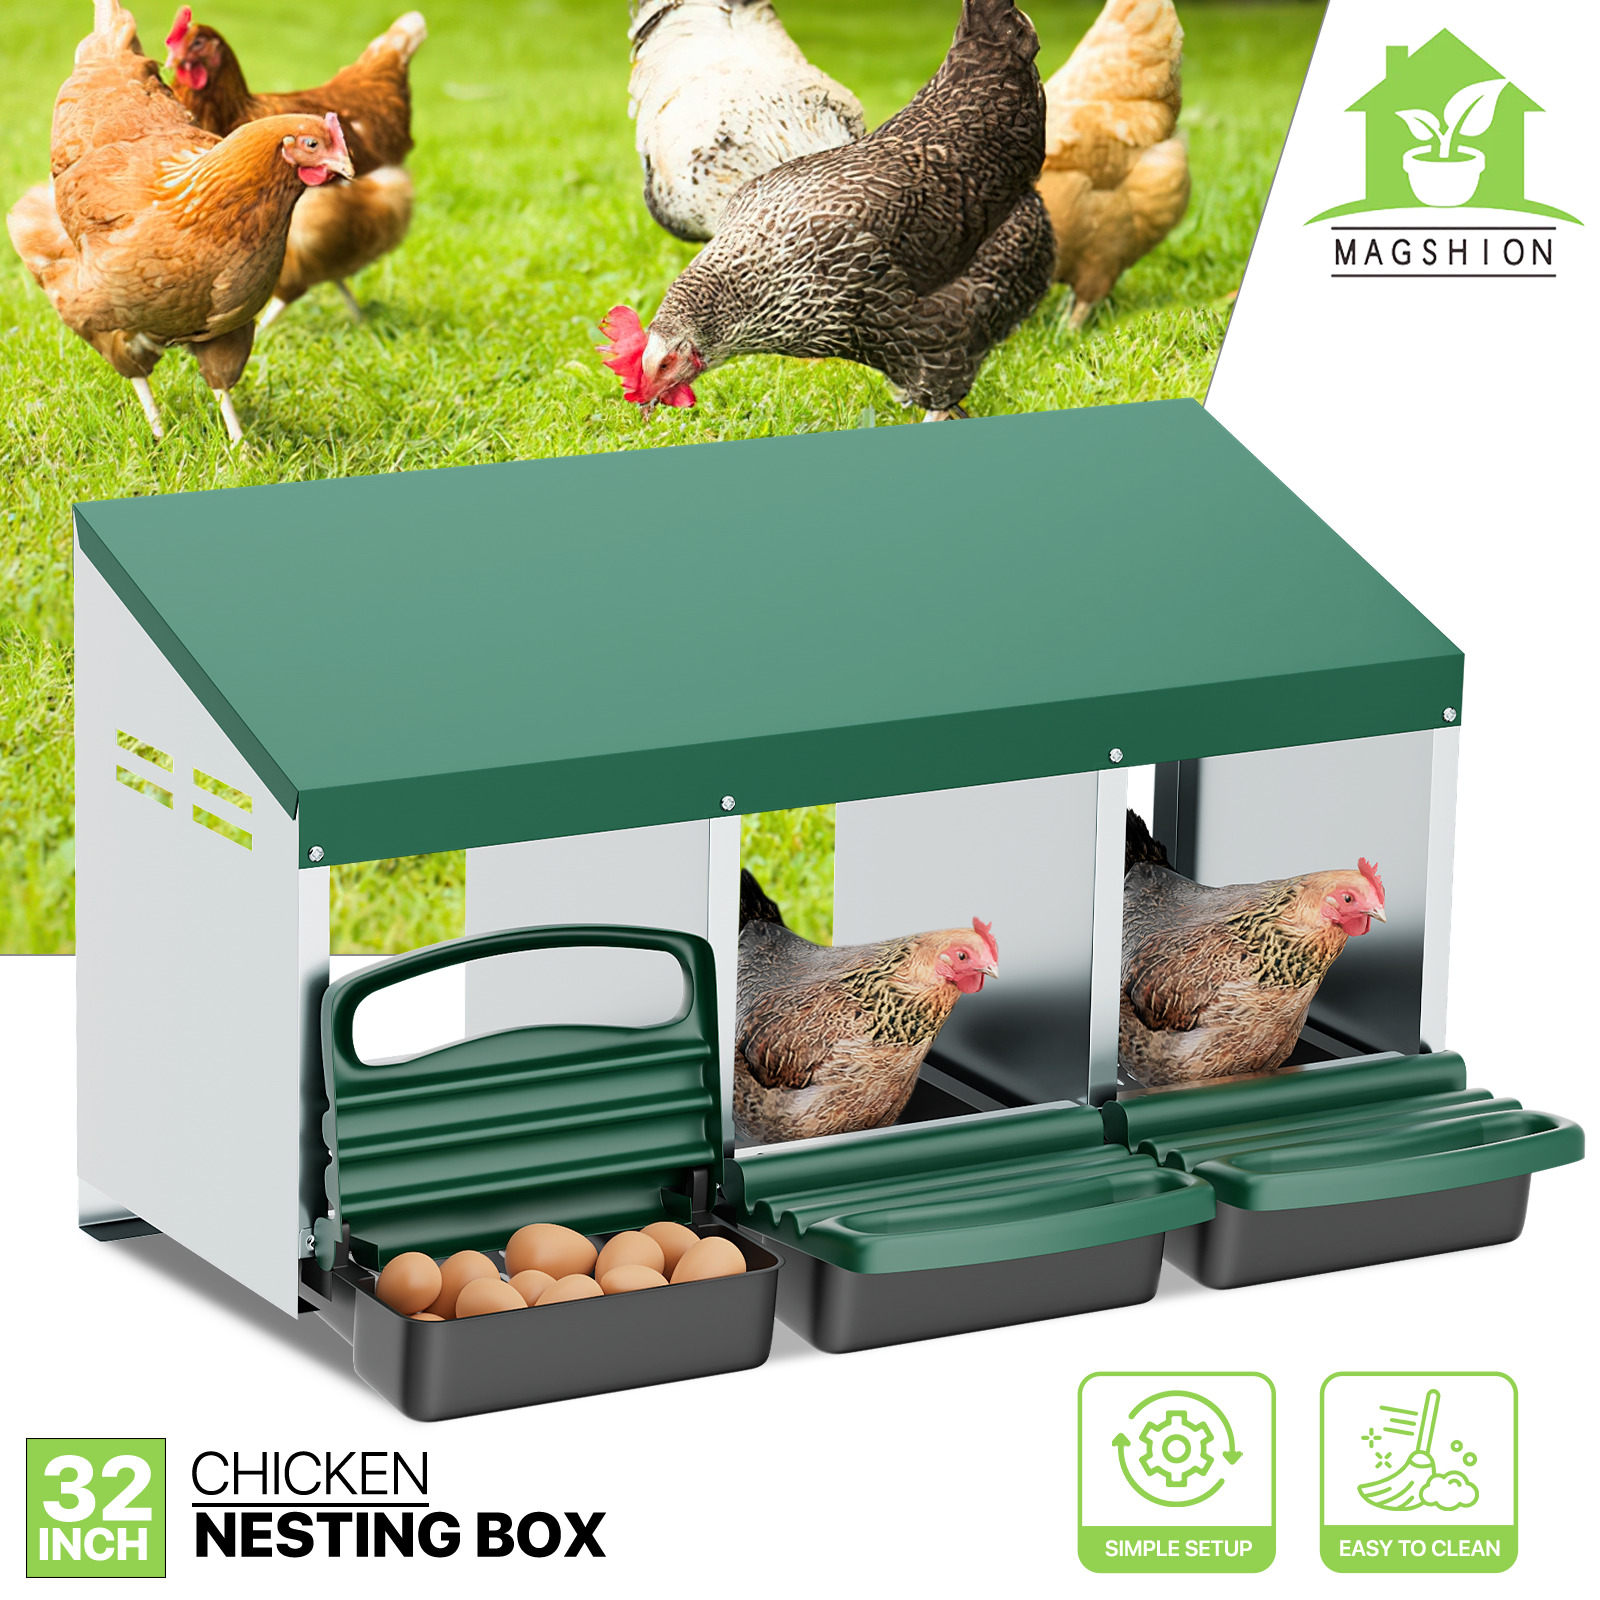 3 Holes Chicken Nesting Box Poultry Perch Brooding Box Eggs Automatic Collection